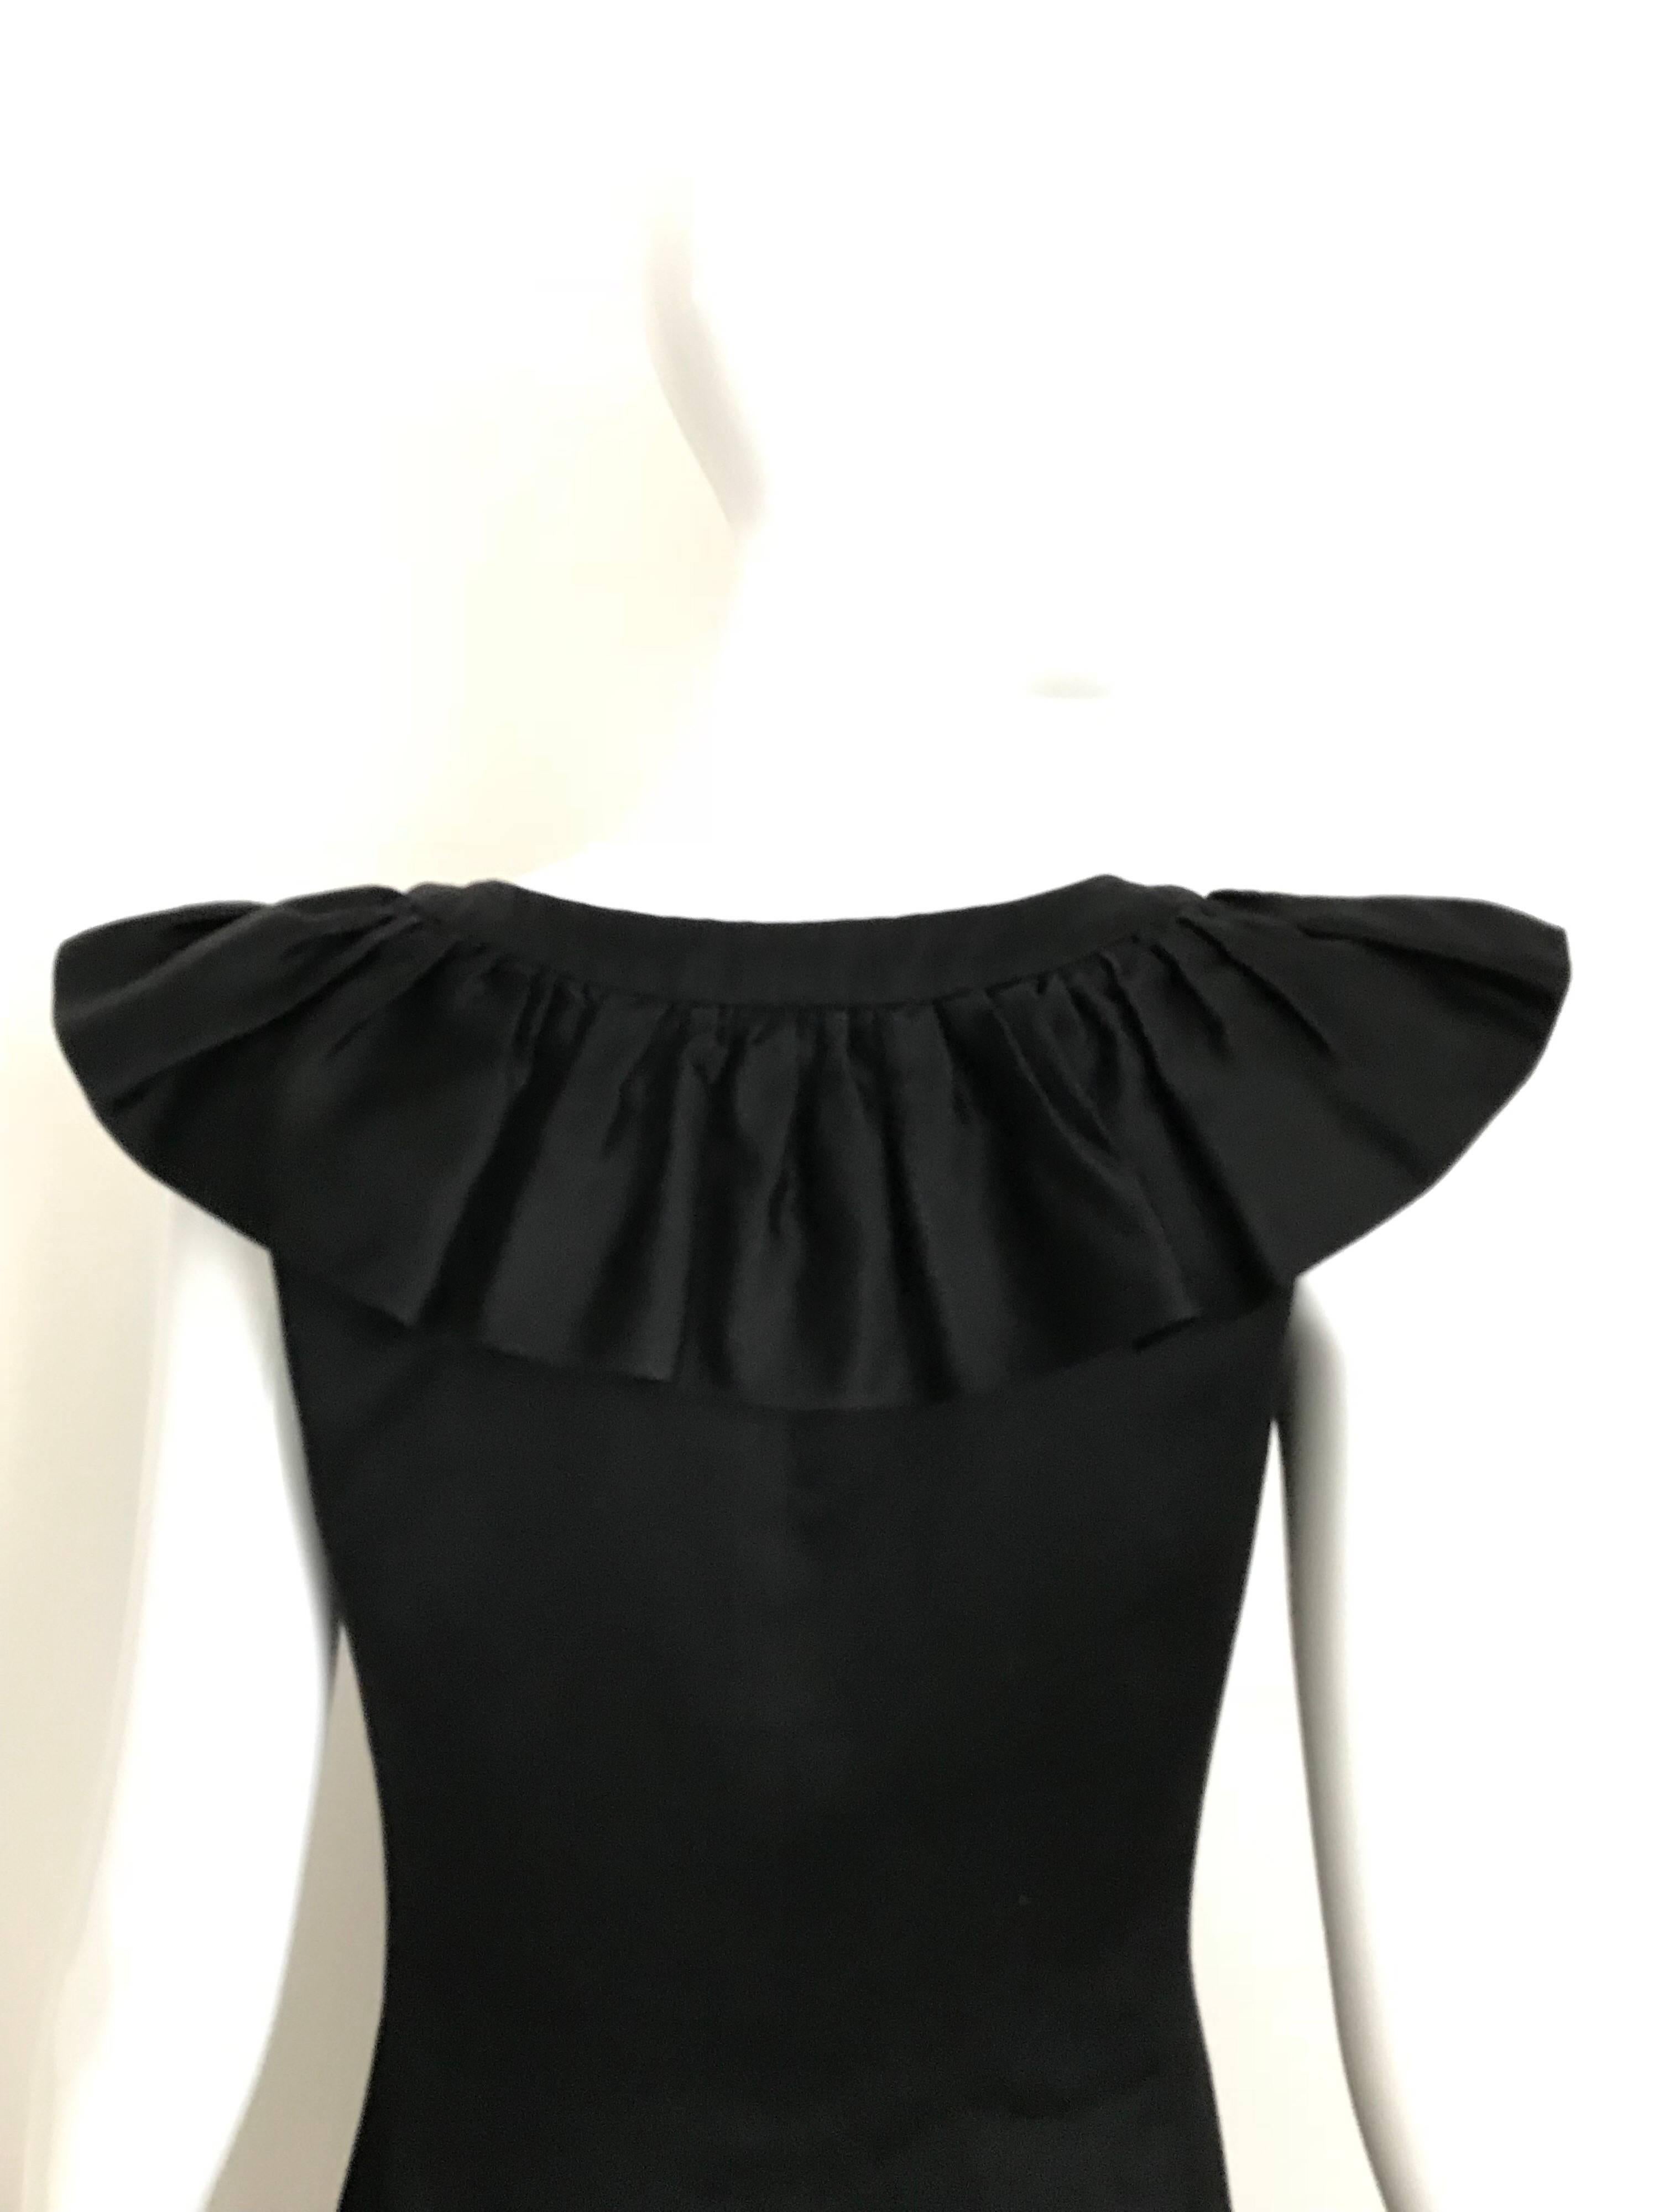 Yves Saint Laurent Black Cotton Dress with Colorful Heart Buttons, 1980s In Excellent Condition For Sale In Beverly Hills, CA